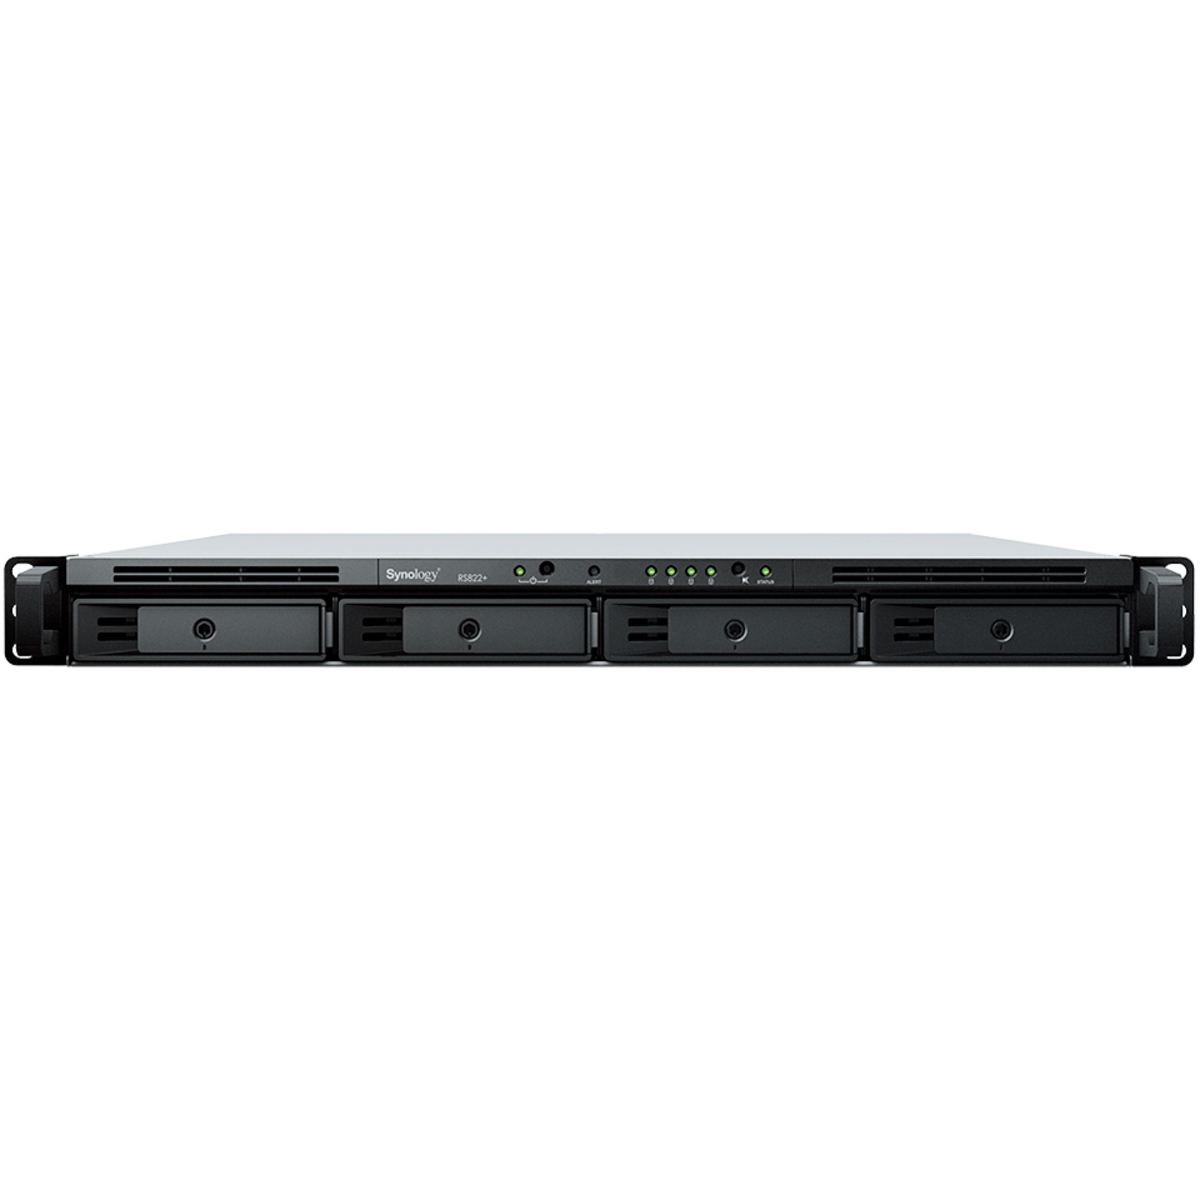 Synology RackStation RS822RP+ 48tb 4-Bay RackMount Multimedia / Power User / Business NAS - Network Attached Storage Device 4x12tb Seagate EXOS X18 ST12000NM000J 3.5 7200rpm SATA 6Gb/s HDD ENTERPRISE Class Drives Installed - Burn-In Tested - FREE RAM UPGRADE RackStation RS822RP+